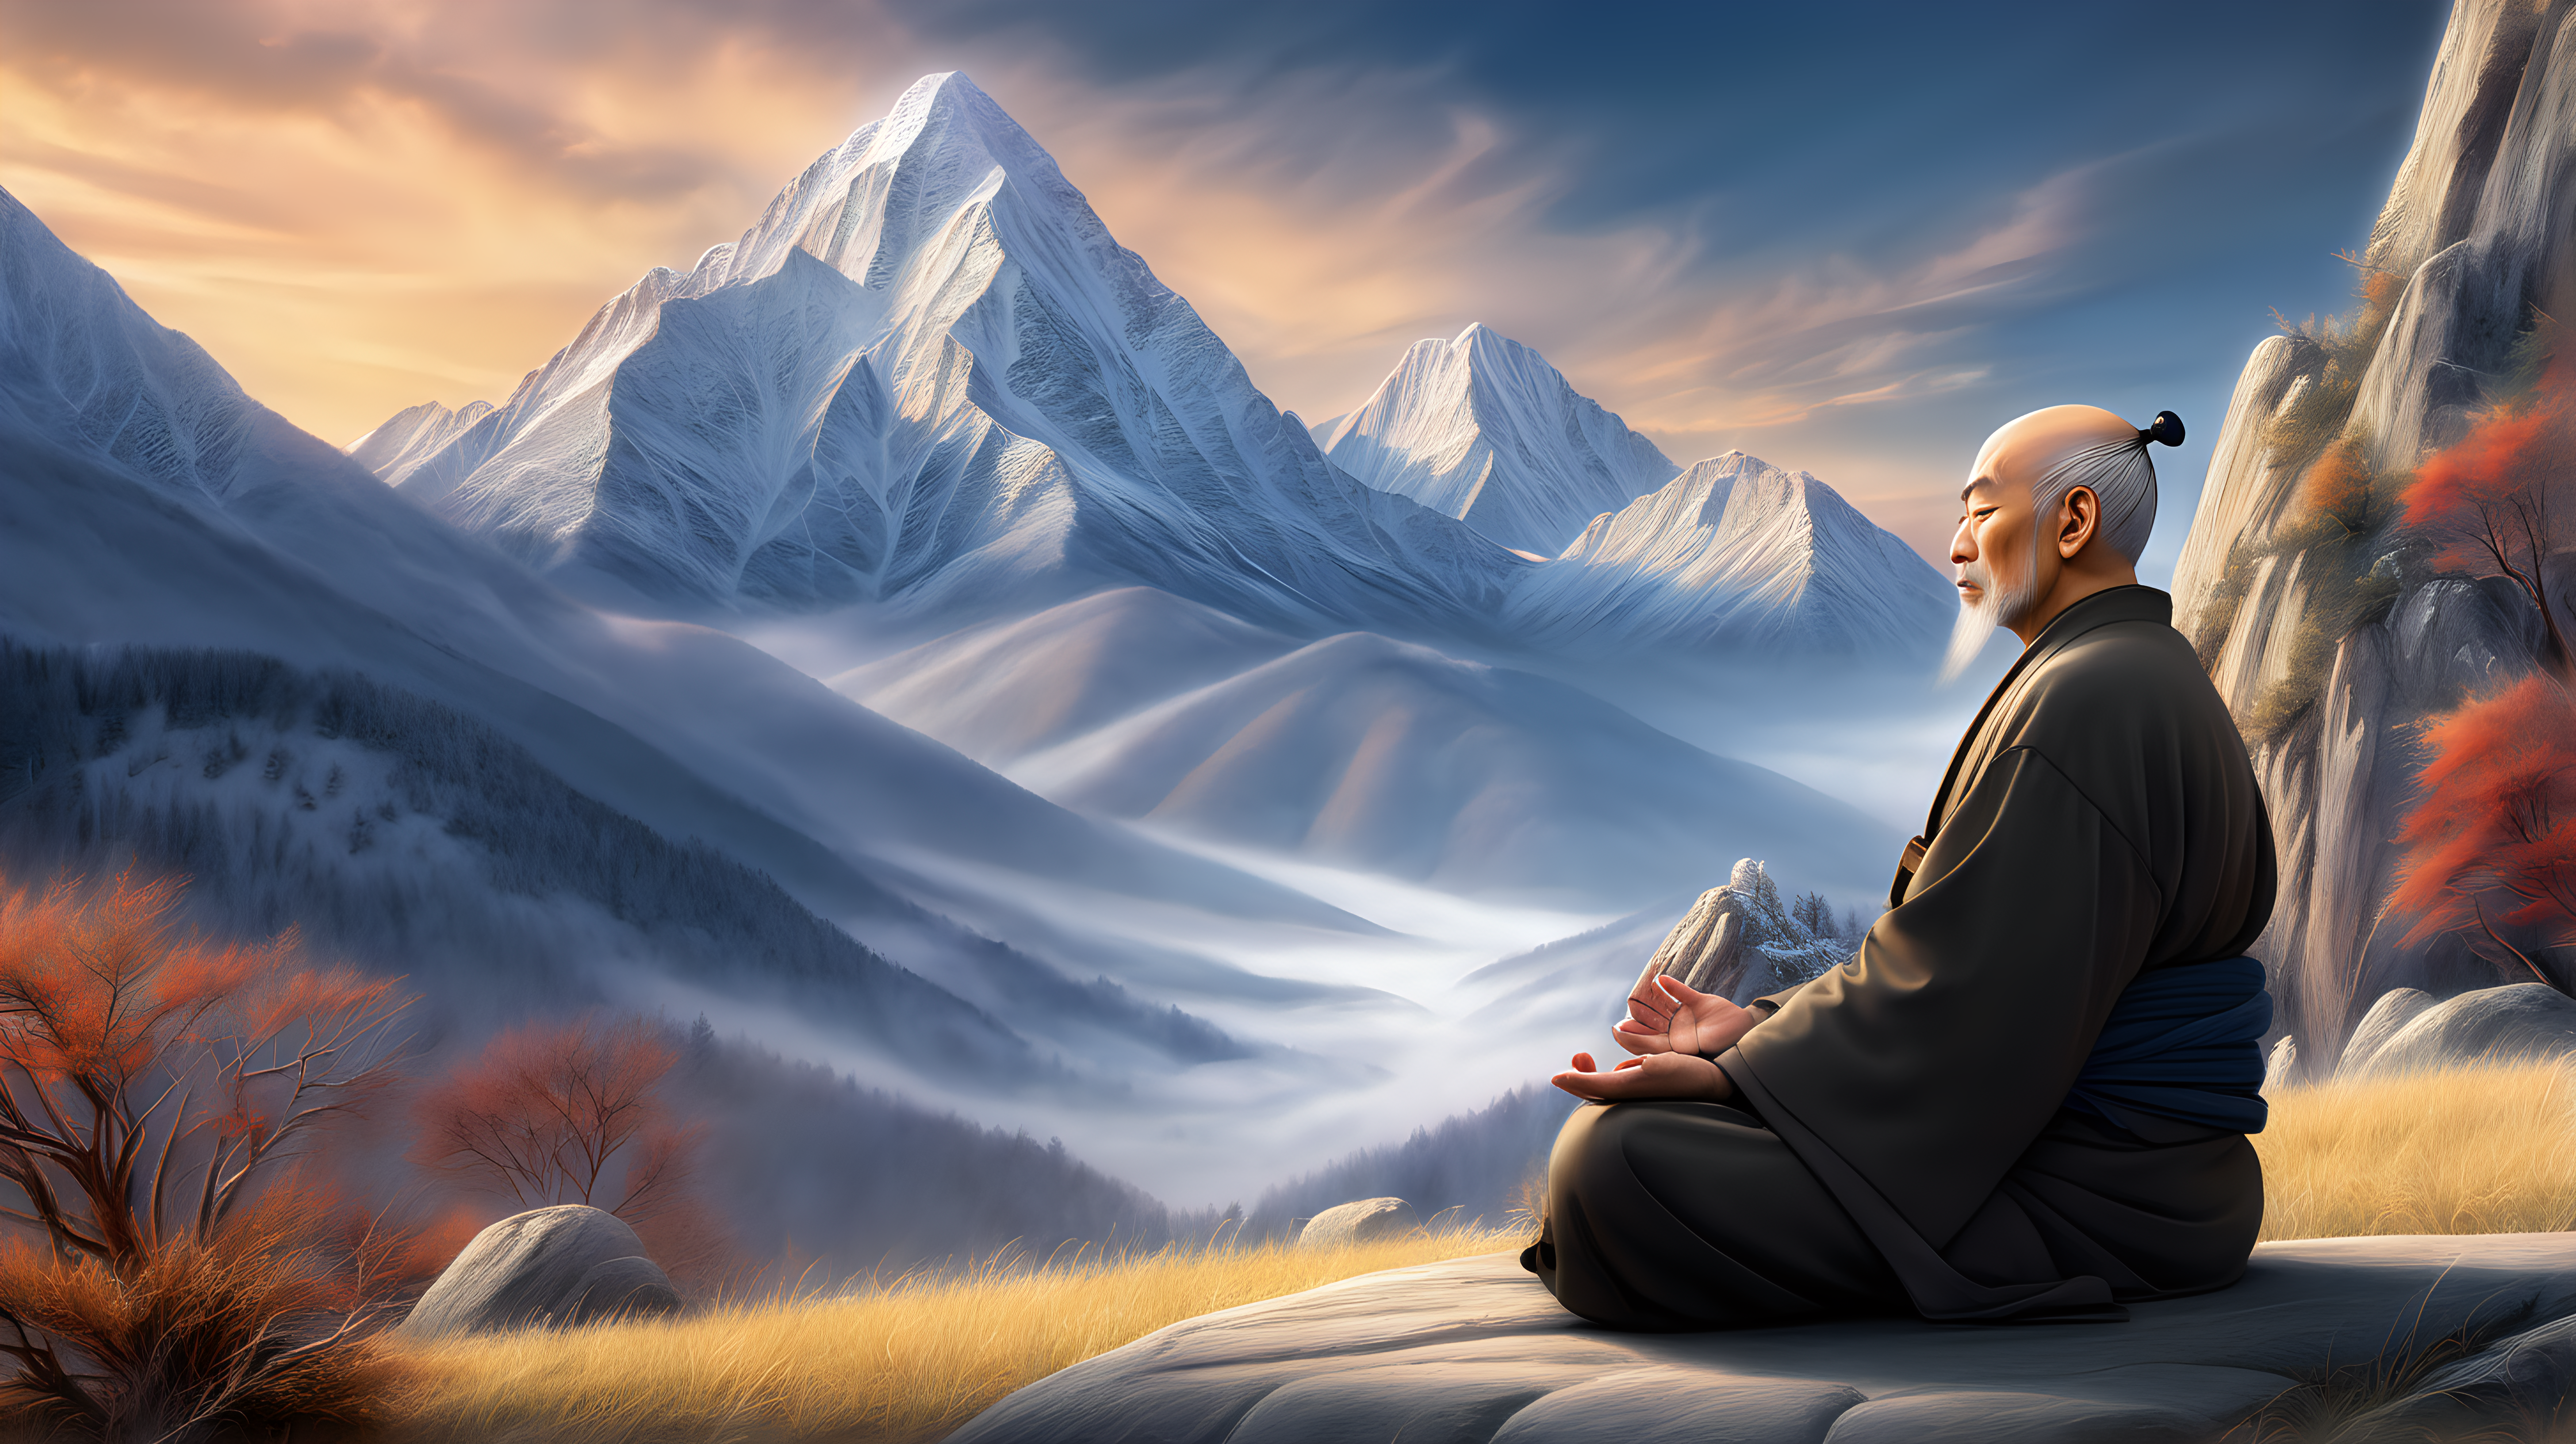 The zen master's stillness is palpable, as he sits in meditation amidst a beautiful mountain. The contrast between his peaceful presence and the chaotic surroundings creates a powerful visual. Rendered in a realistic style, with intricate details and vibrant colors, this image is a testament to the power of silence in any environment.